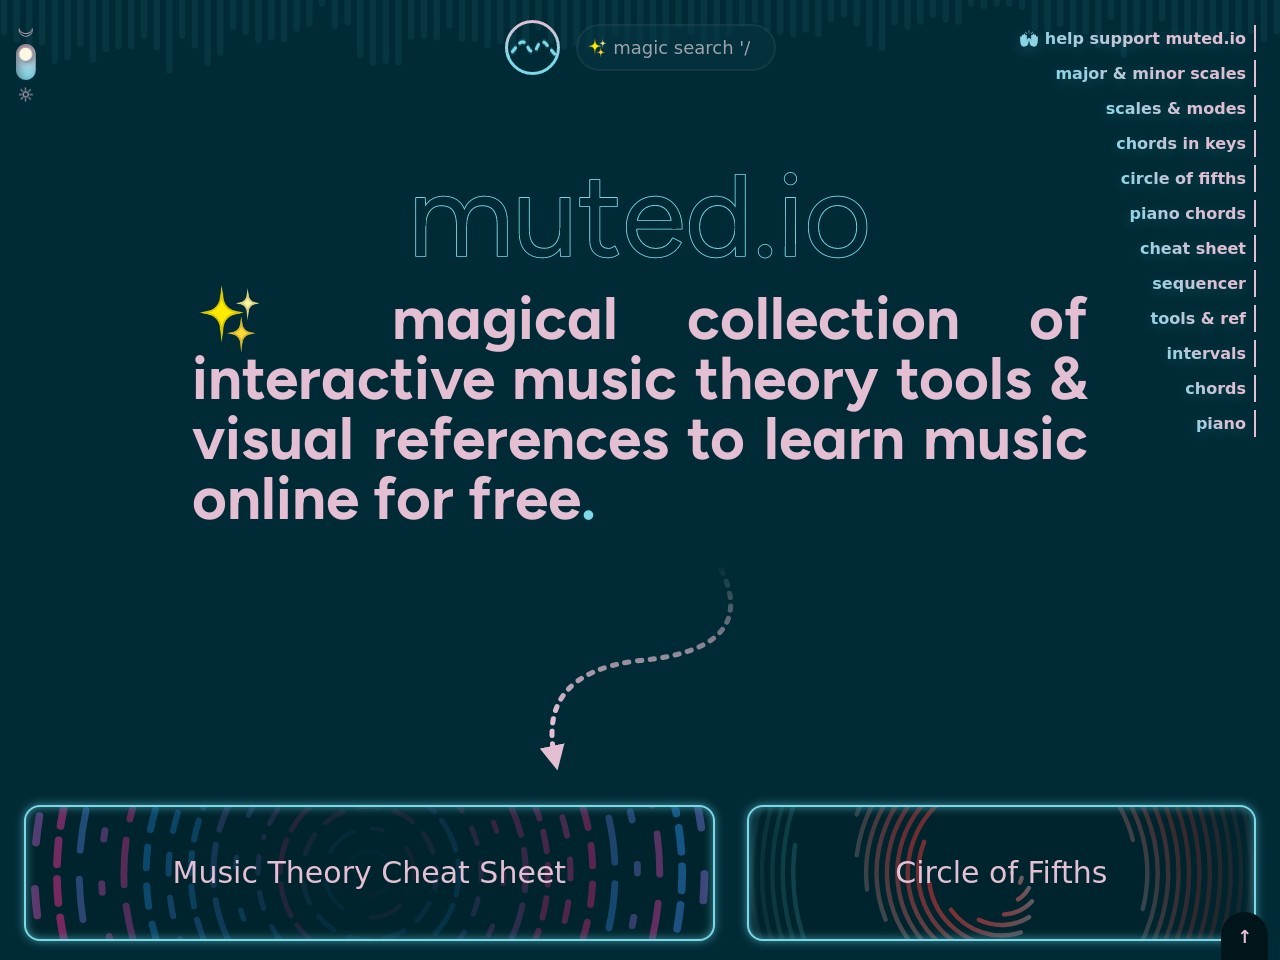 Magical Music Theory Tools to Learn Music Online for Free